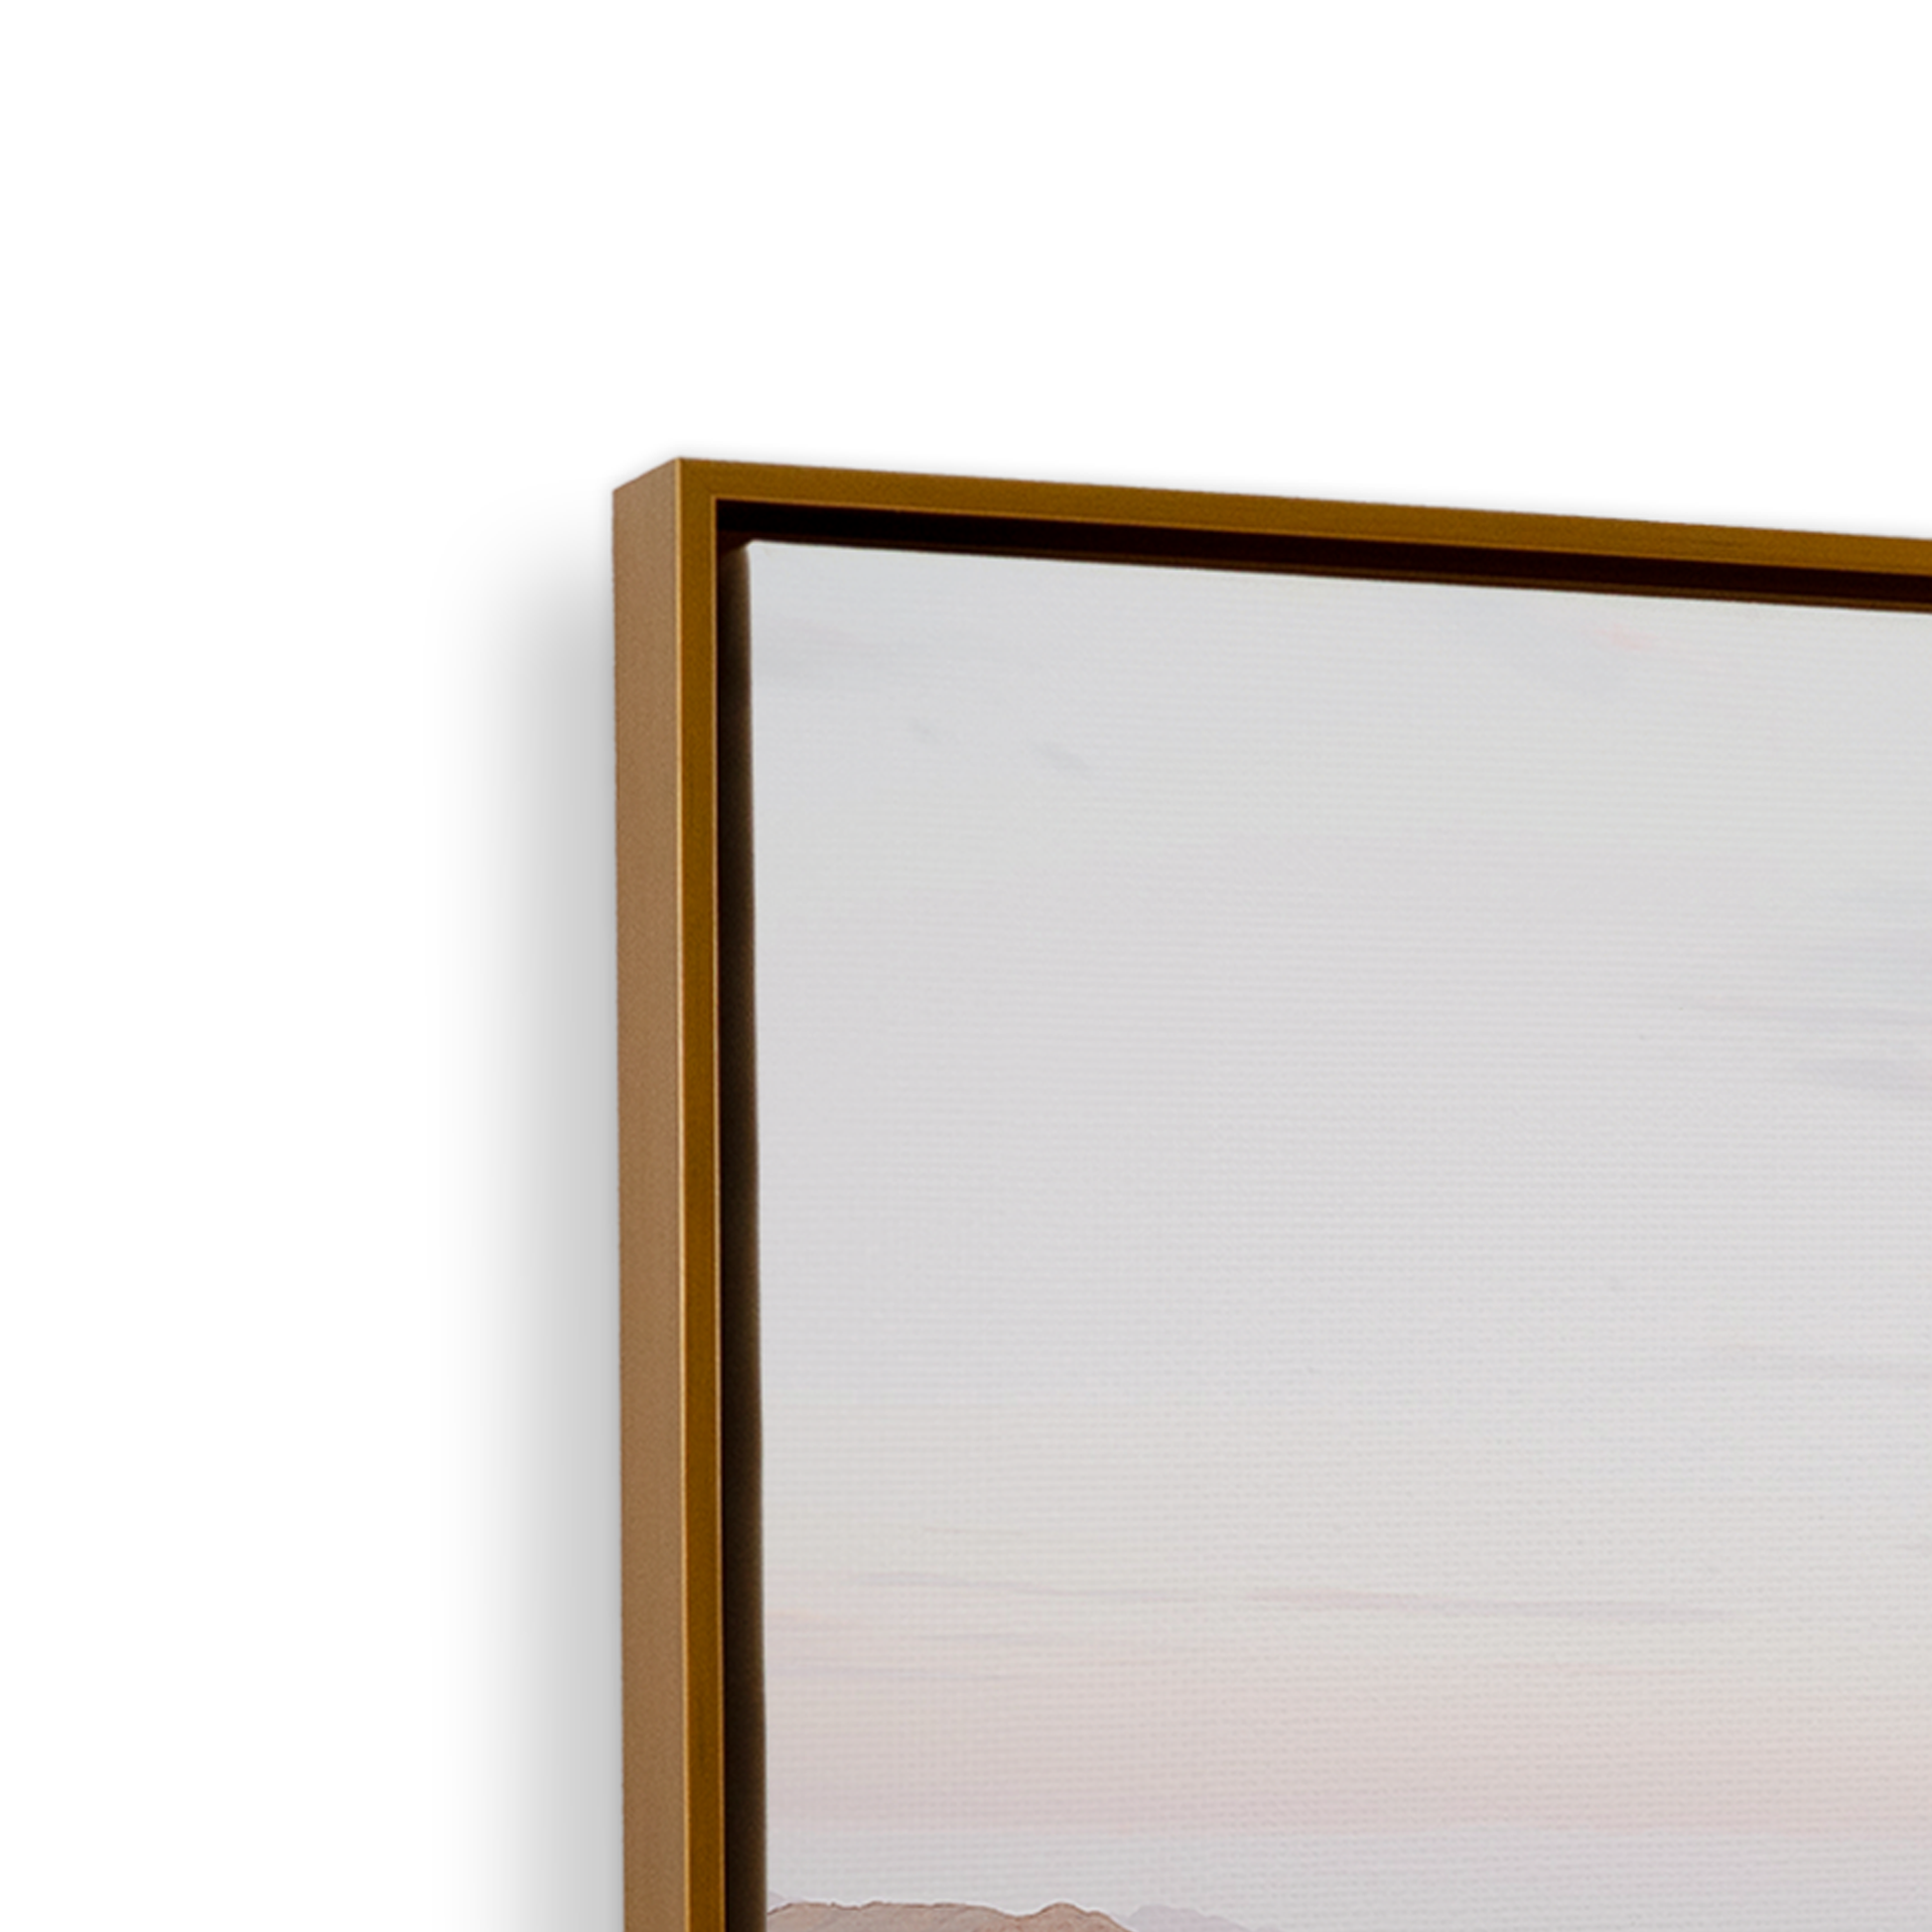 [color:Polished Gold], Picture of the corner of the frame